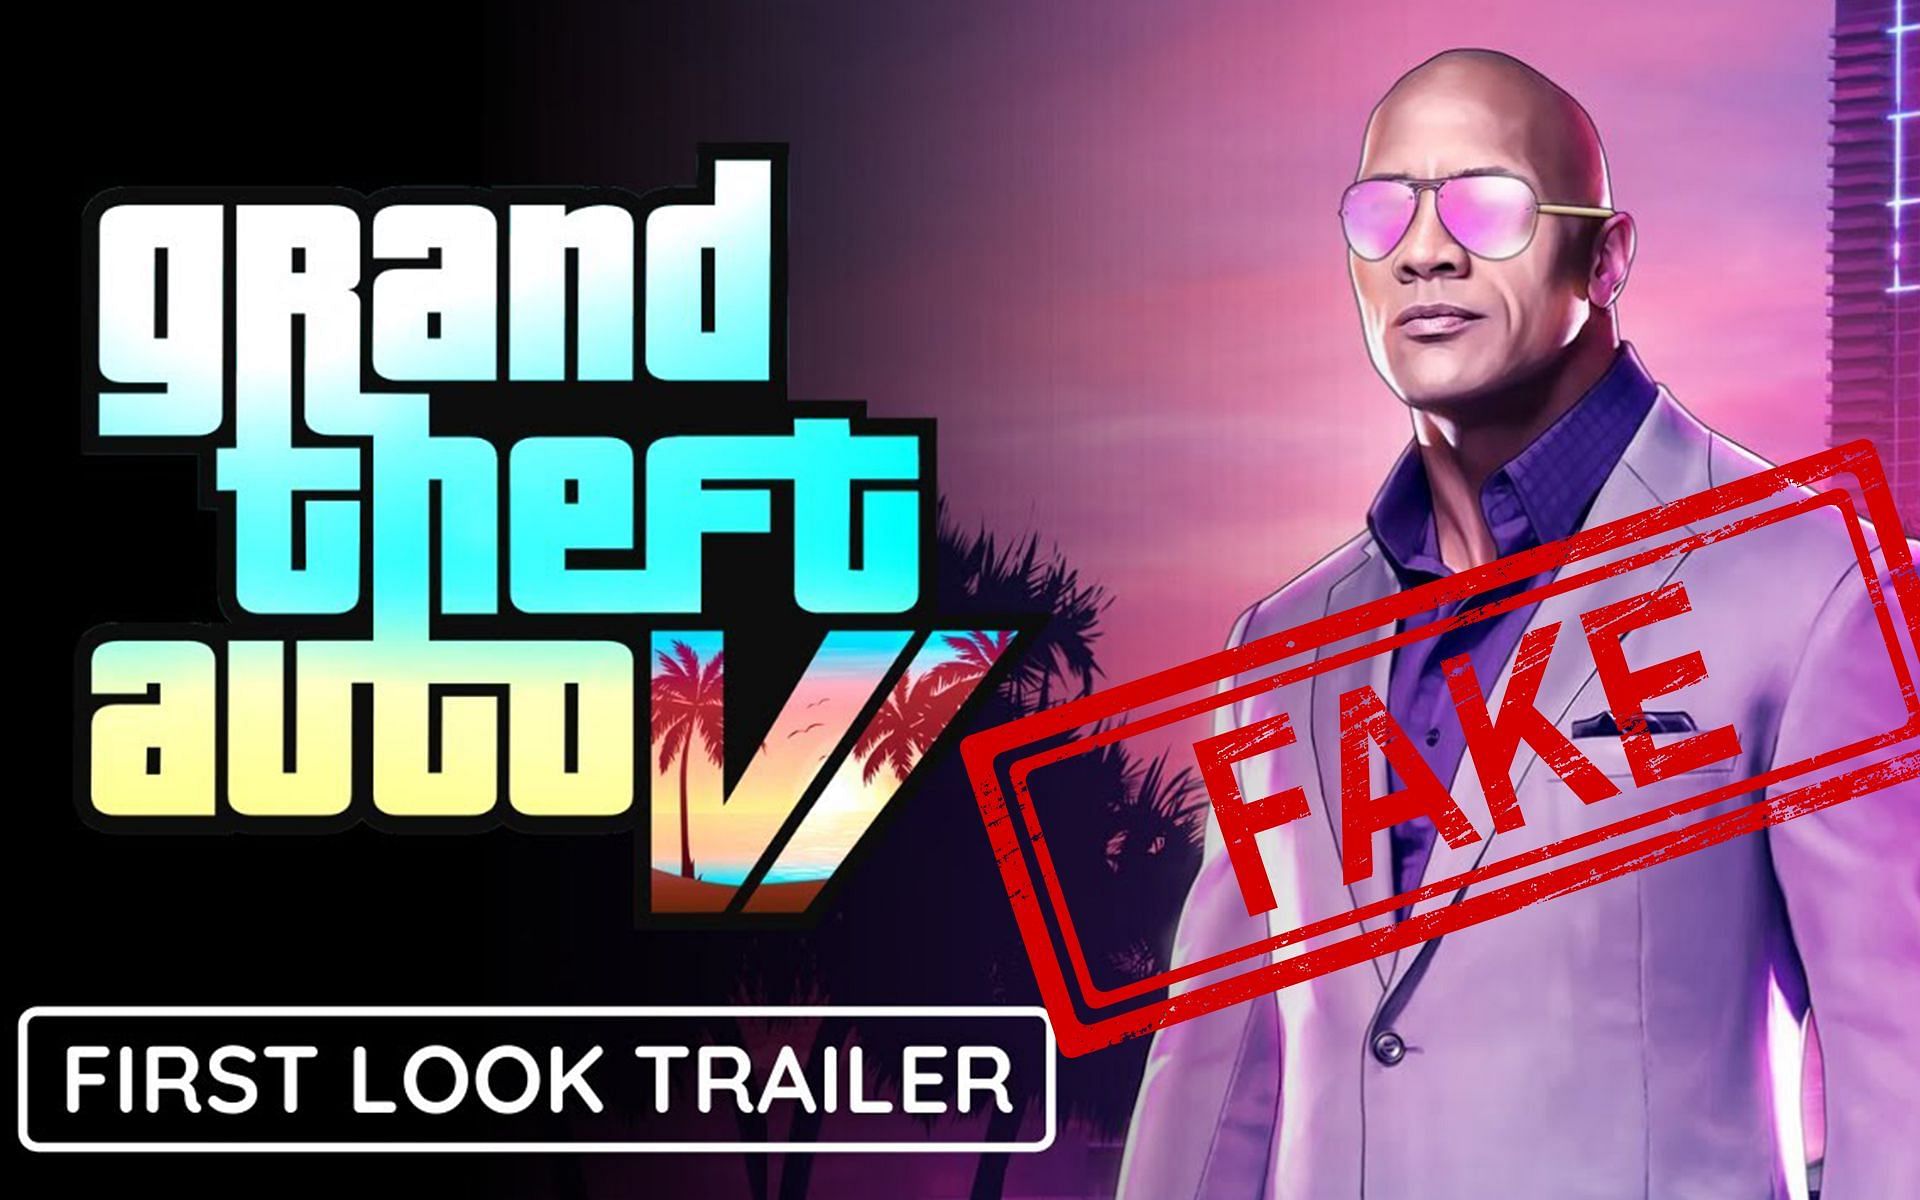 GTA gamers are getting overwhelmed with the number of trailers floating around online (Image via Sportskeeda)